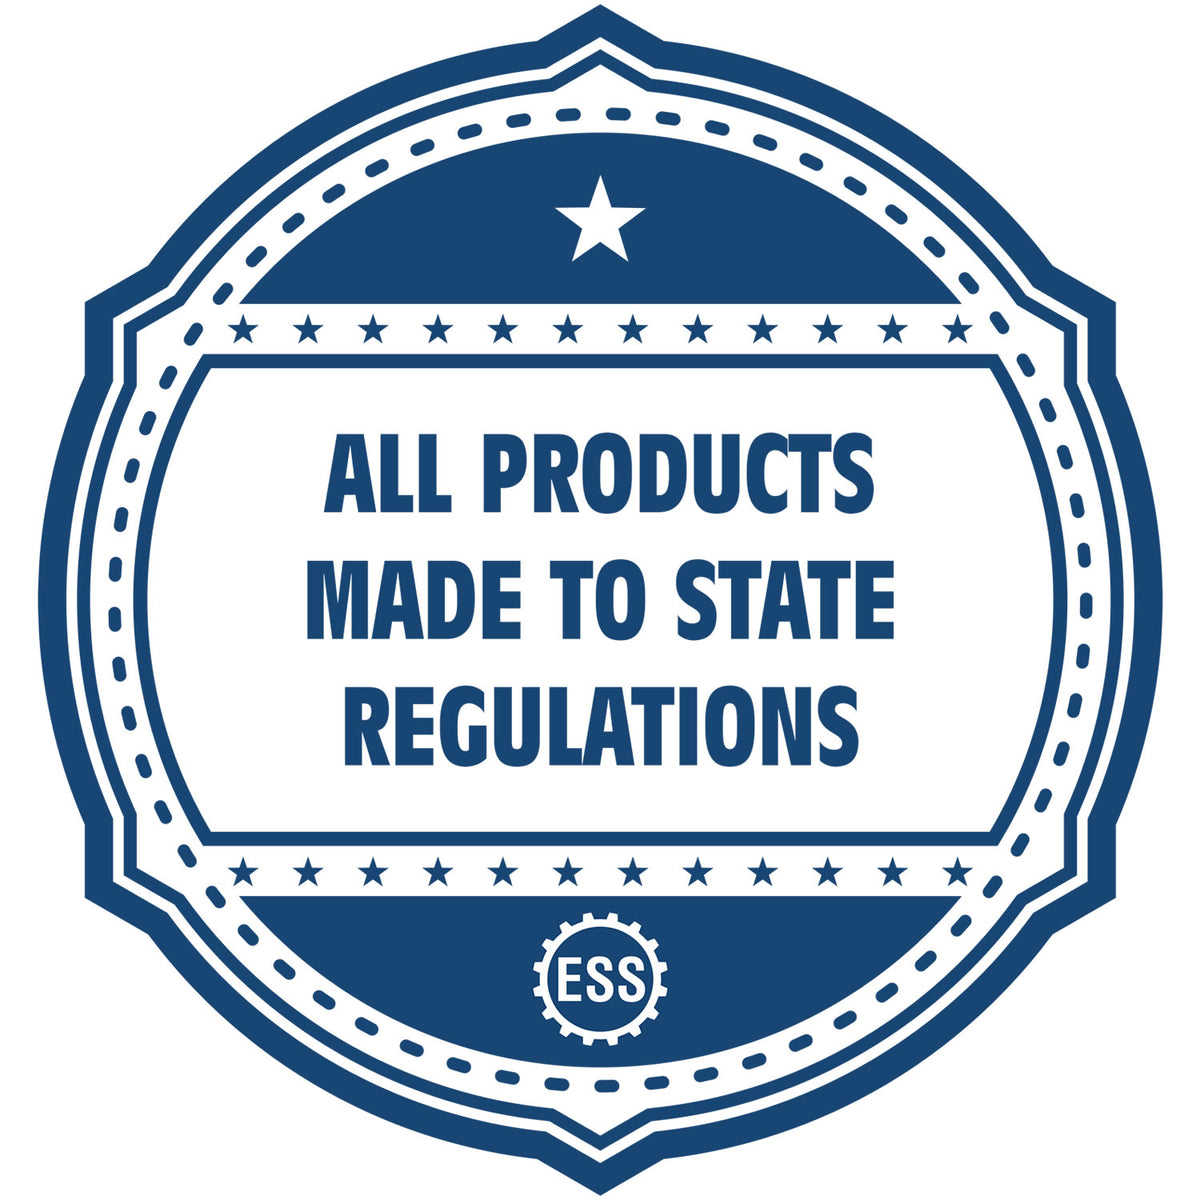 A blue icon or badge for the Self-Inking Kansas Geologist Stamp showing that this product is made in compliance with state regulations.